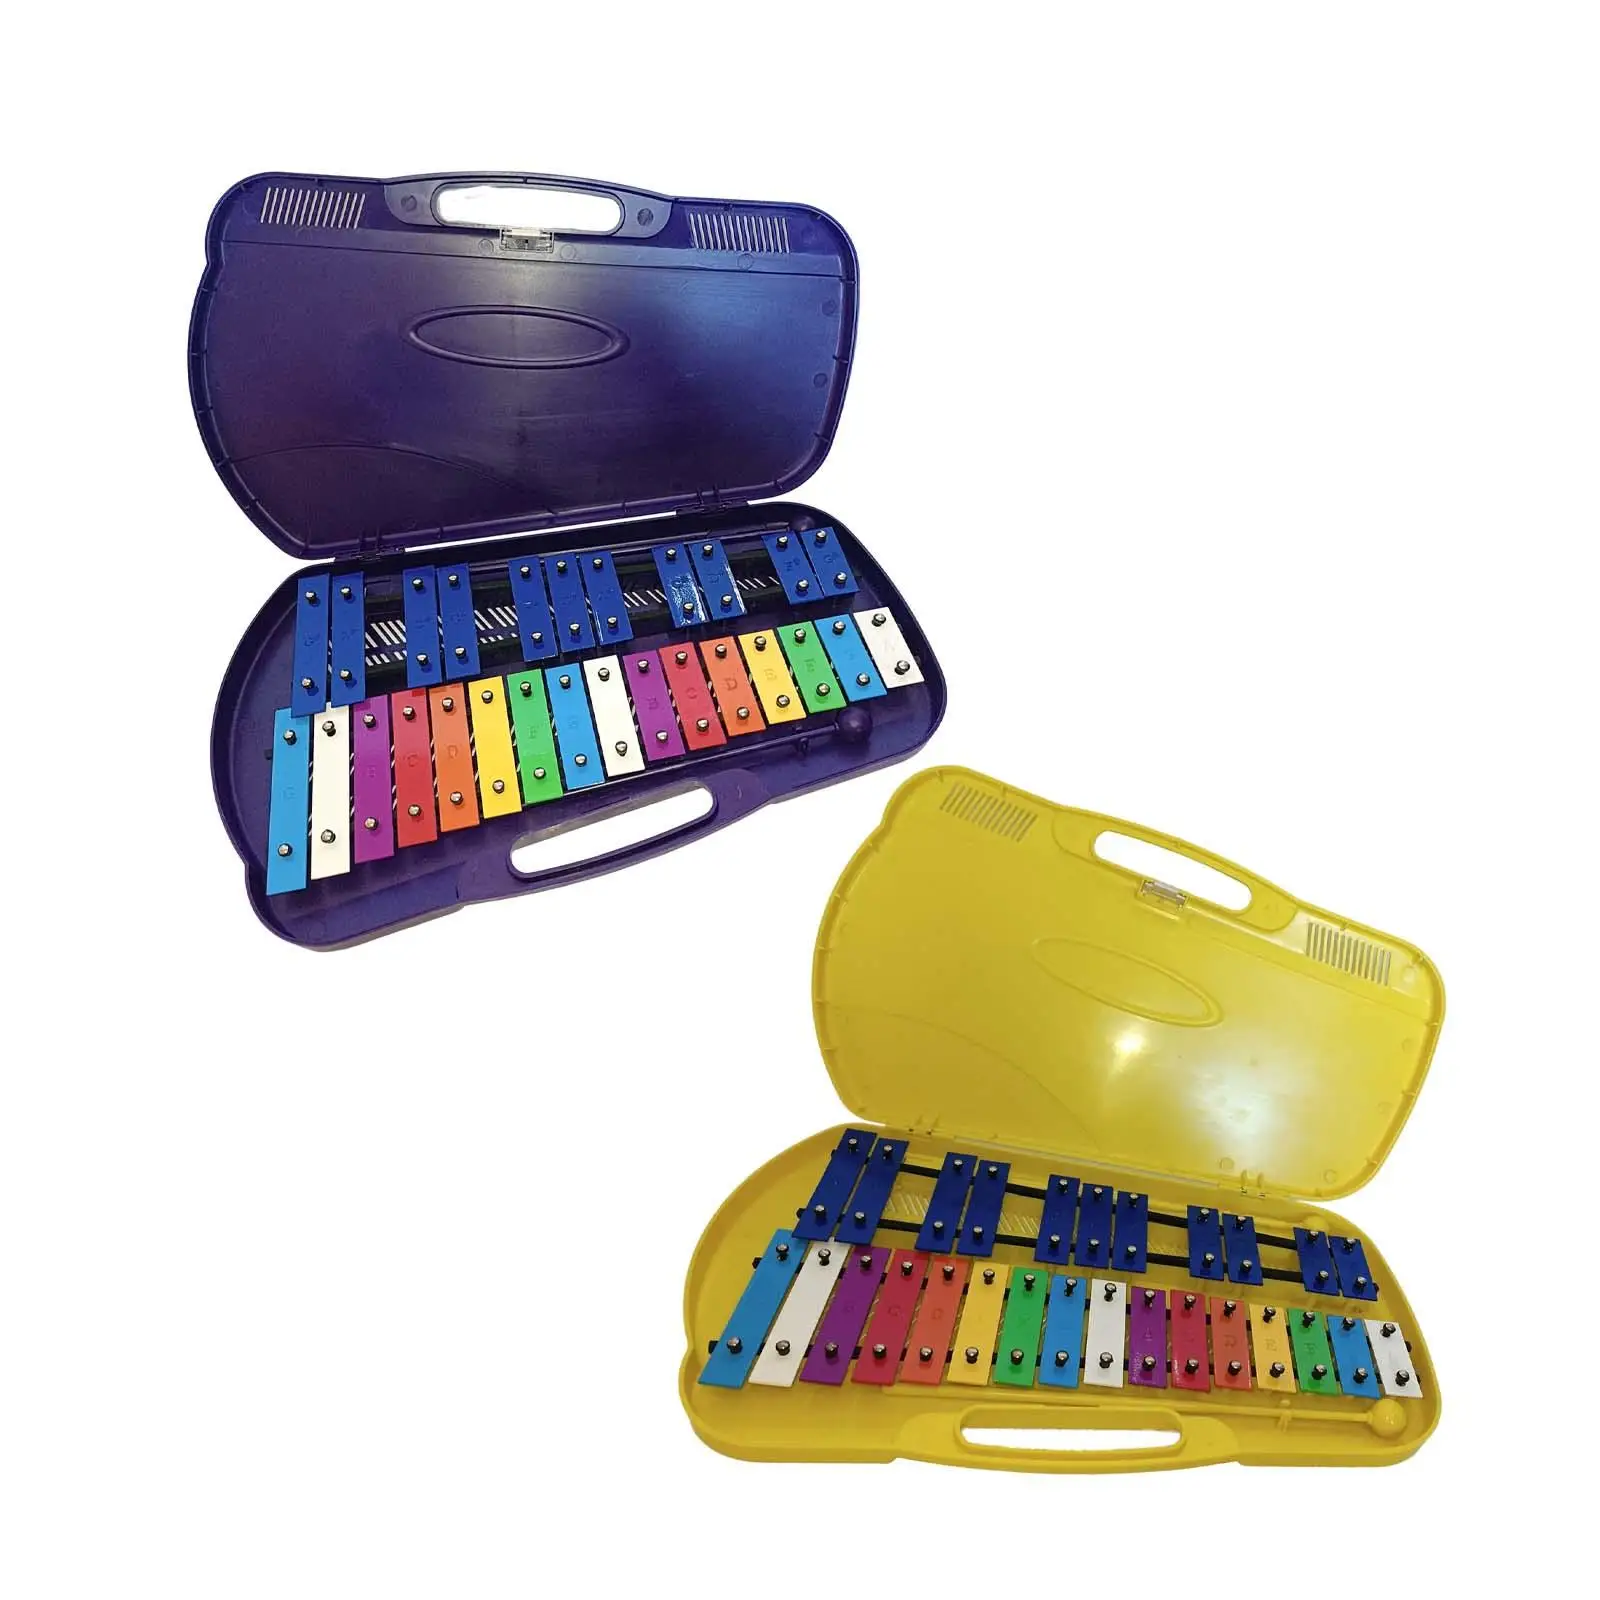 Xylophone 27 Notes Chromatic Keys Professional Cleartuned in Case for Gifts Preschool Music Teaching Kids Child